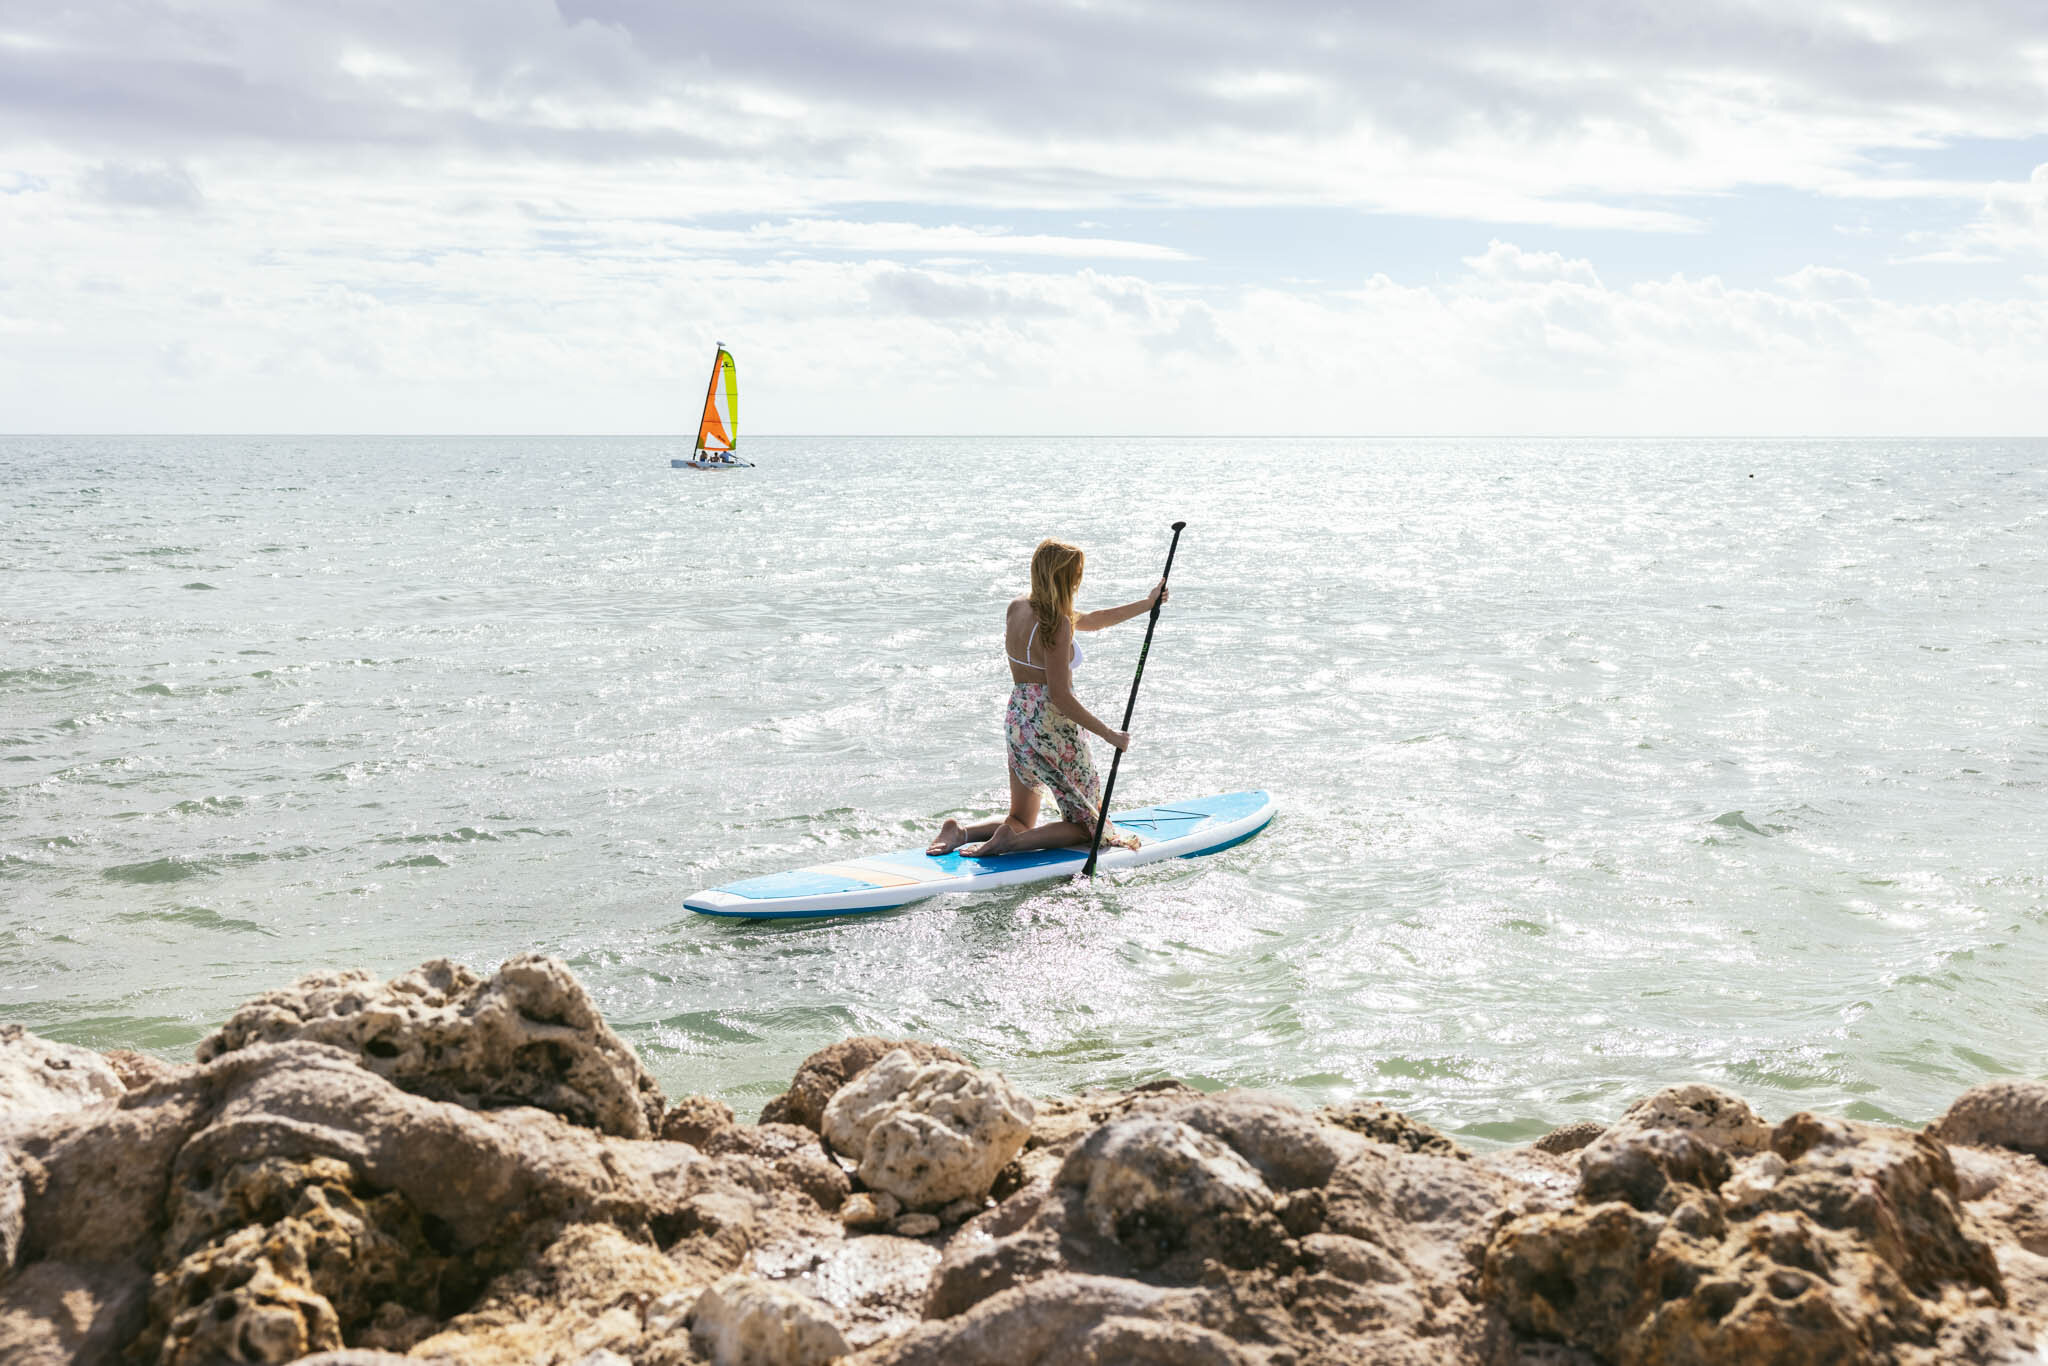  Woman Paddleboarding In The Atlantic Ocean Off The Islands Of Islamorada’s Private Beach, With A Sailboat Farther Out On The Water. 